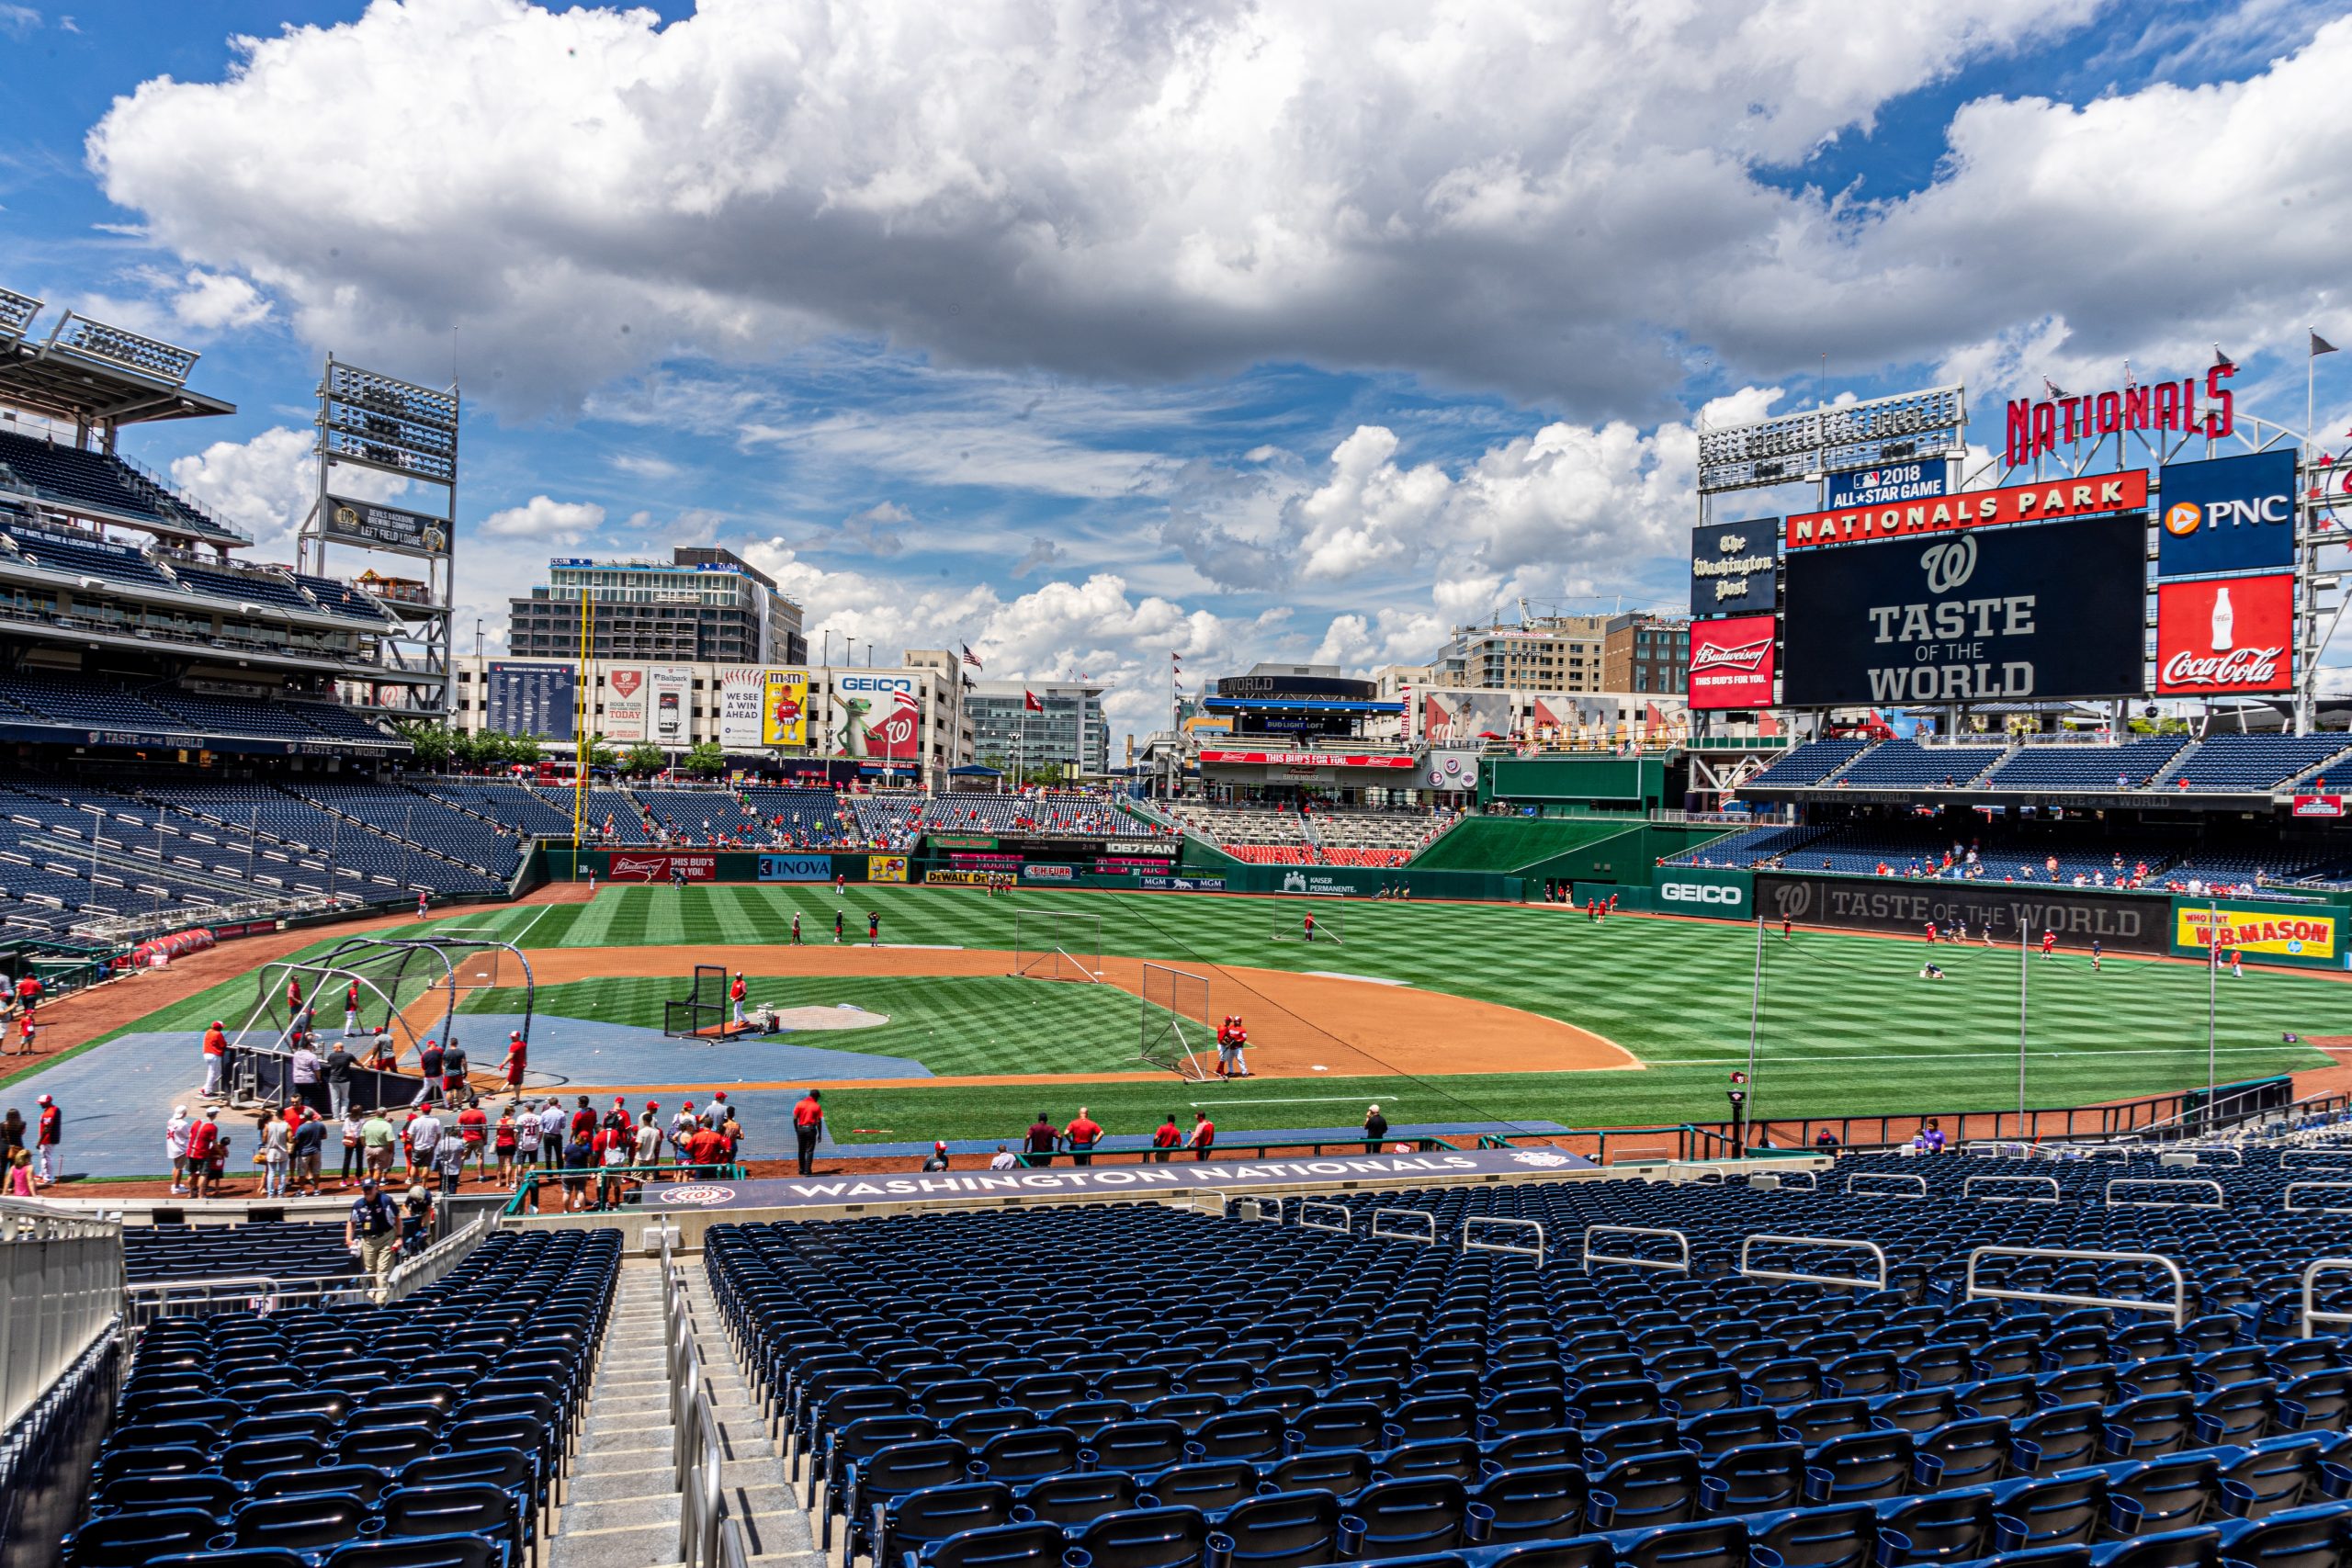 Photograph of Nationals Park, home of the baseball team the Washington Nationals, taken from the stands behind and to the right of home plate.